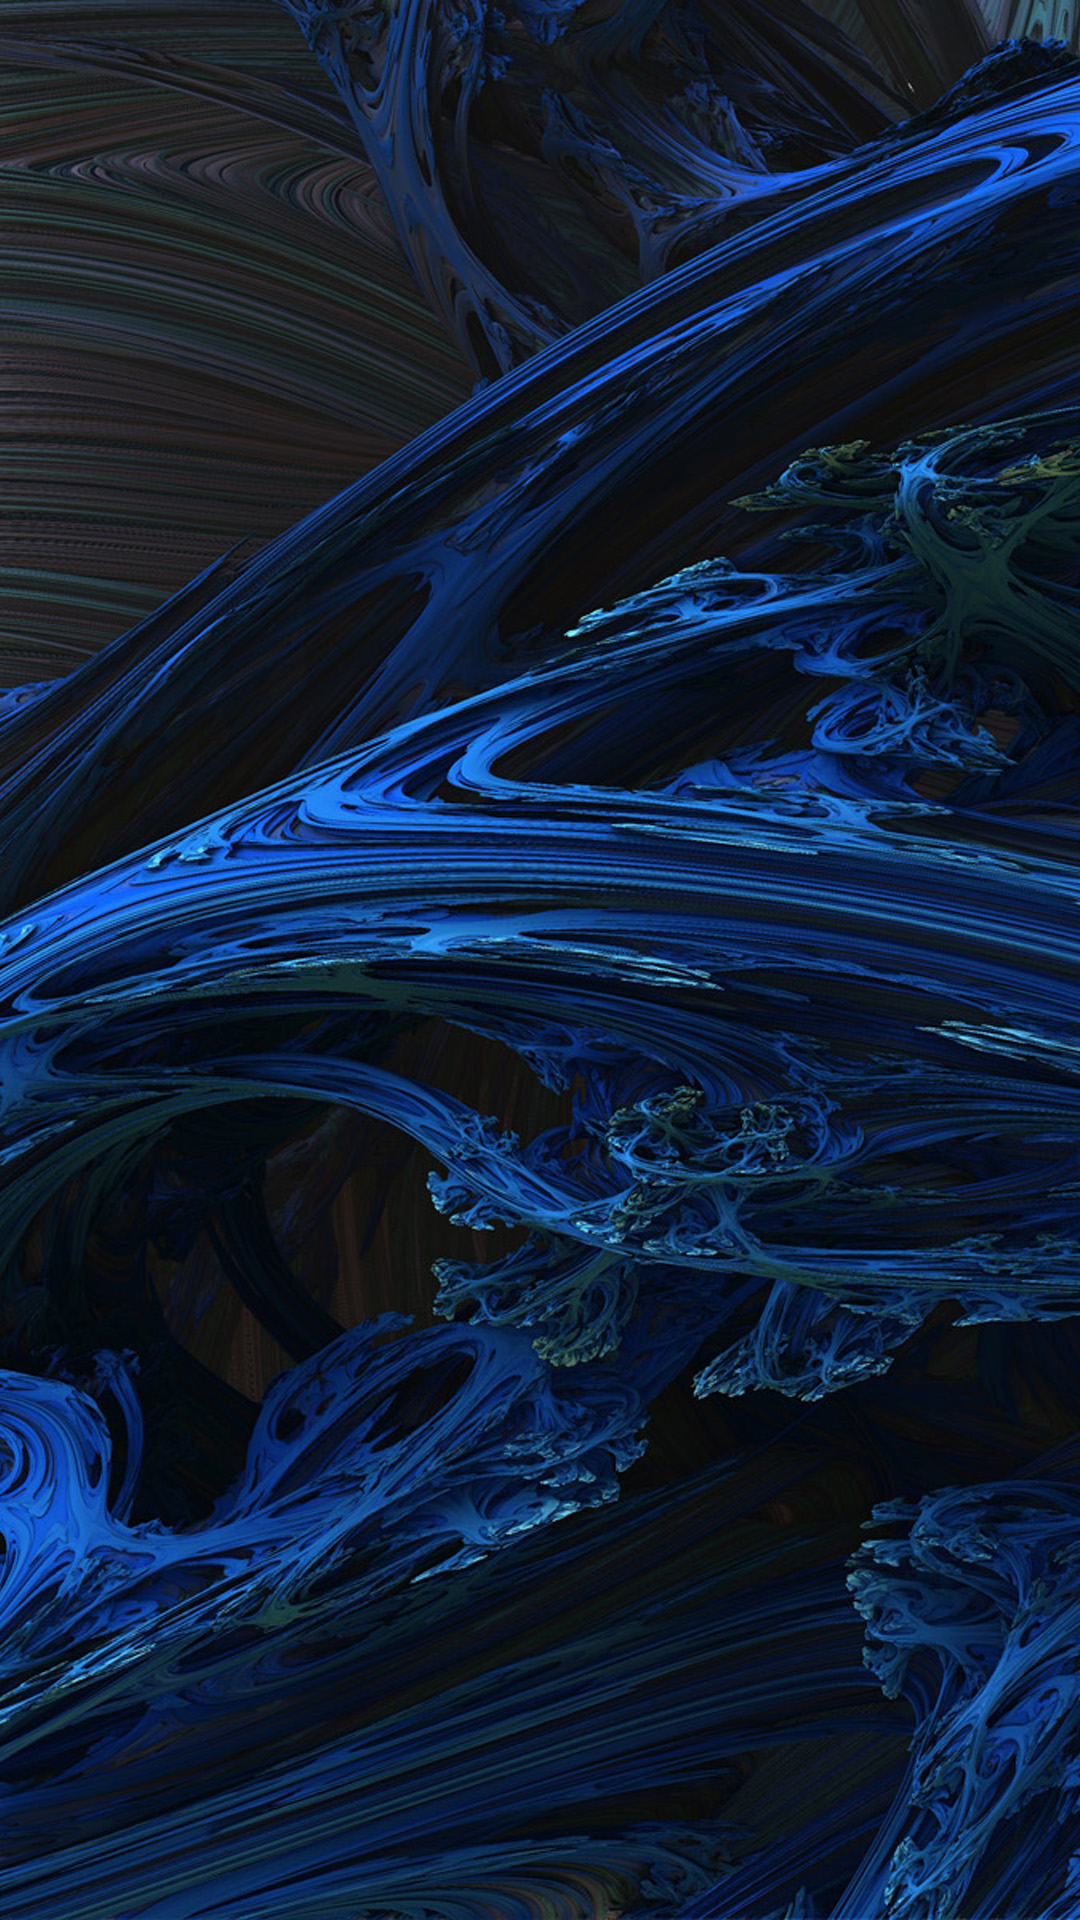 Blue 3d Abstract For Iphone 6 Plus Wallpaper Iphone 6 Plus Wallpaper Iphone11 スマホ壁紙 待受画像ギャラリー